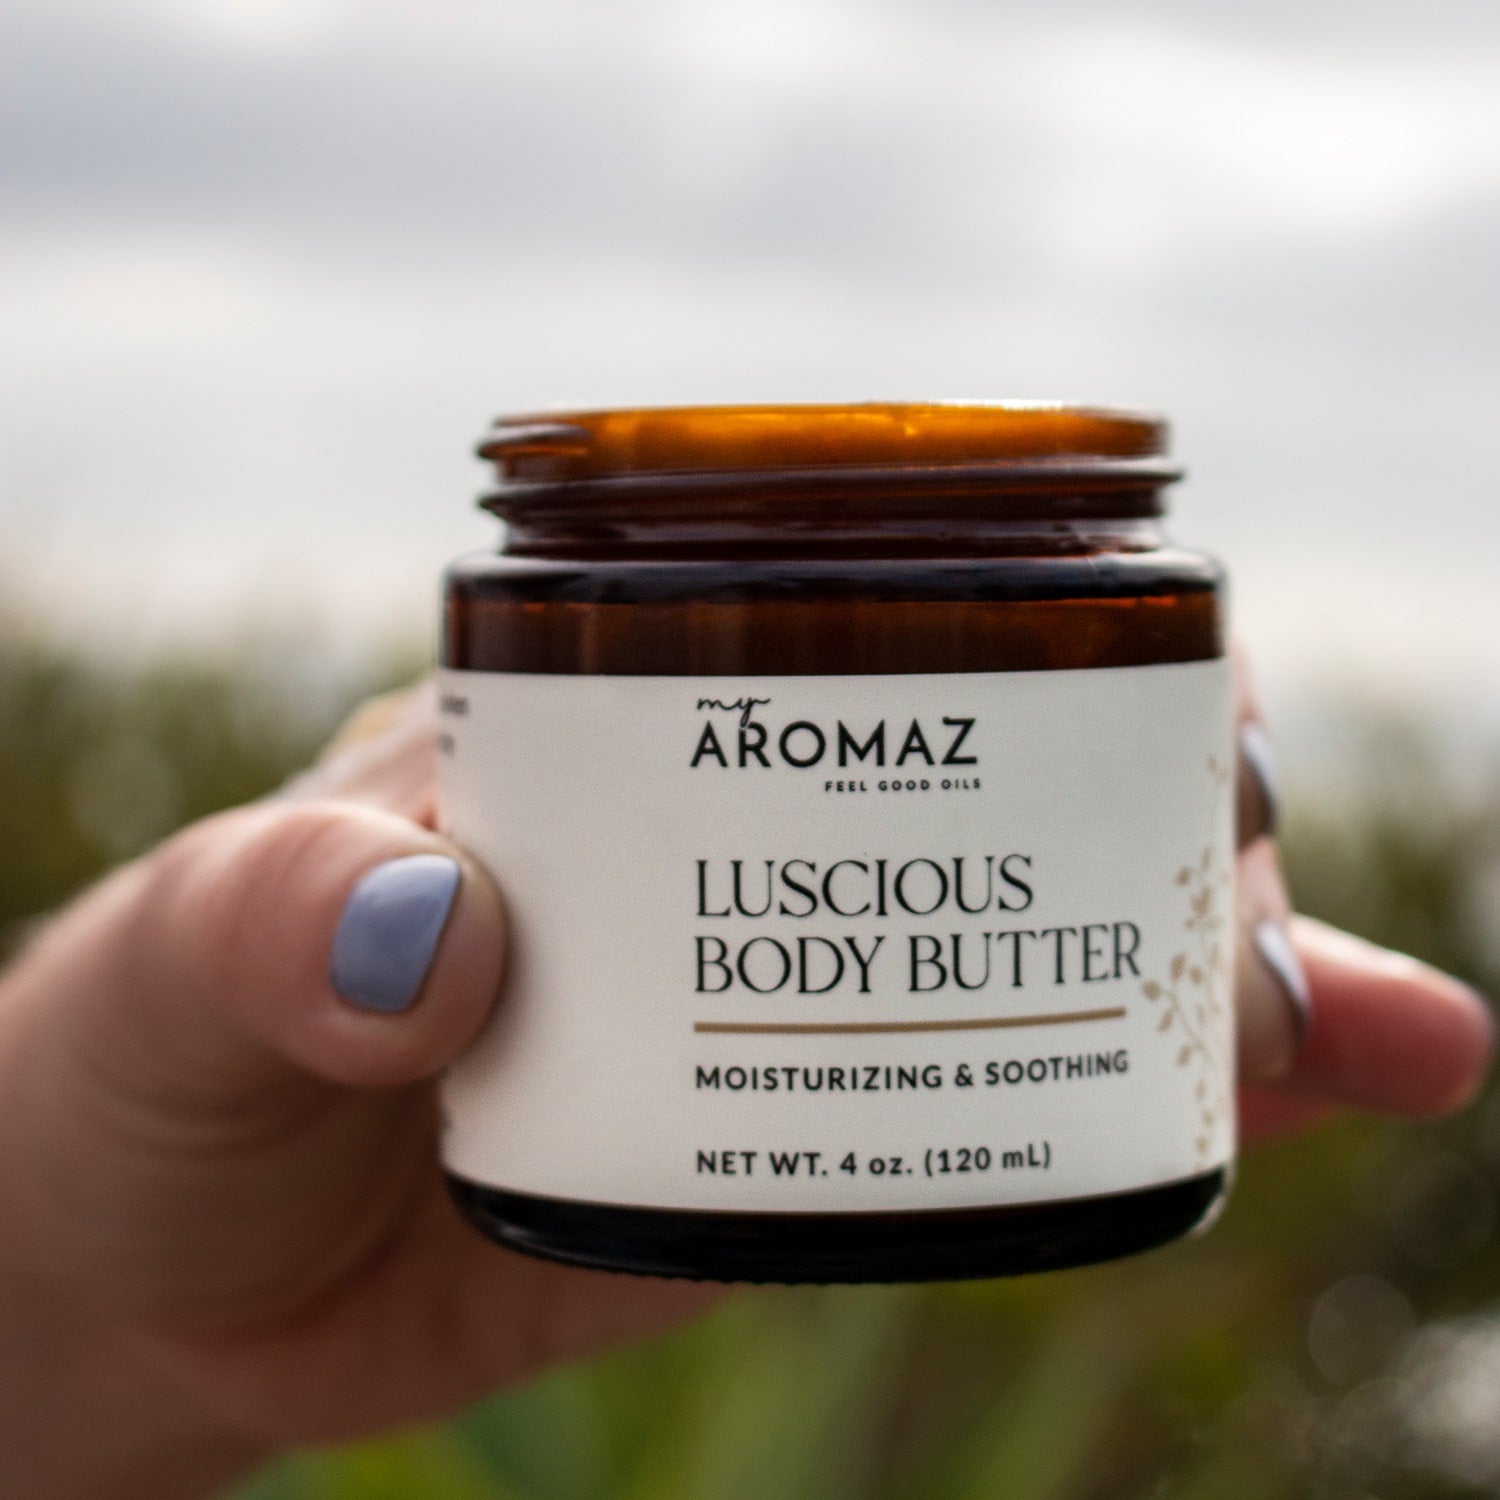 Luscious Body Butter with lavender essential oil